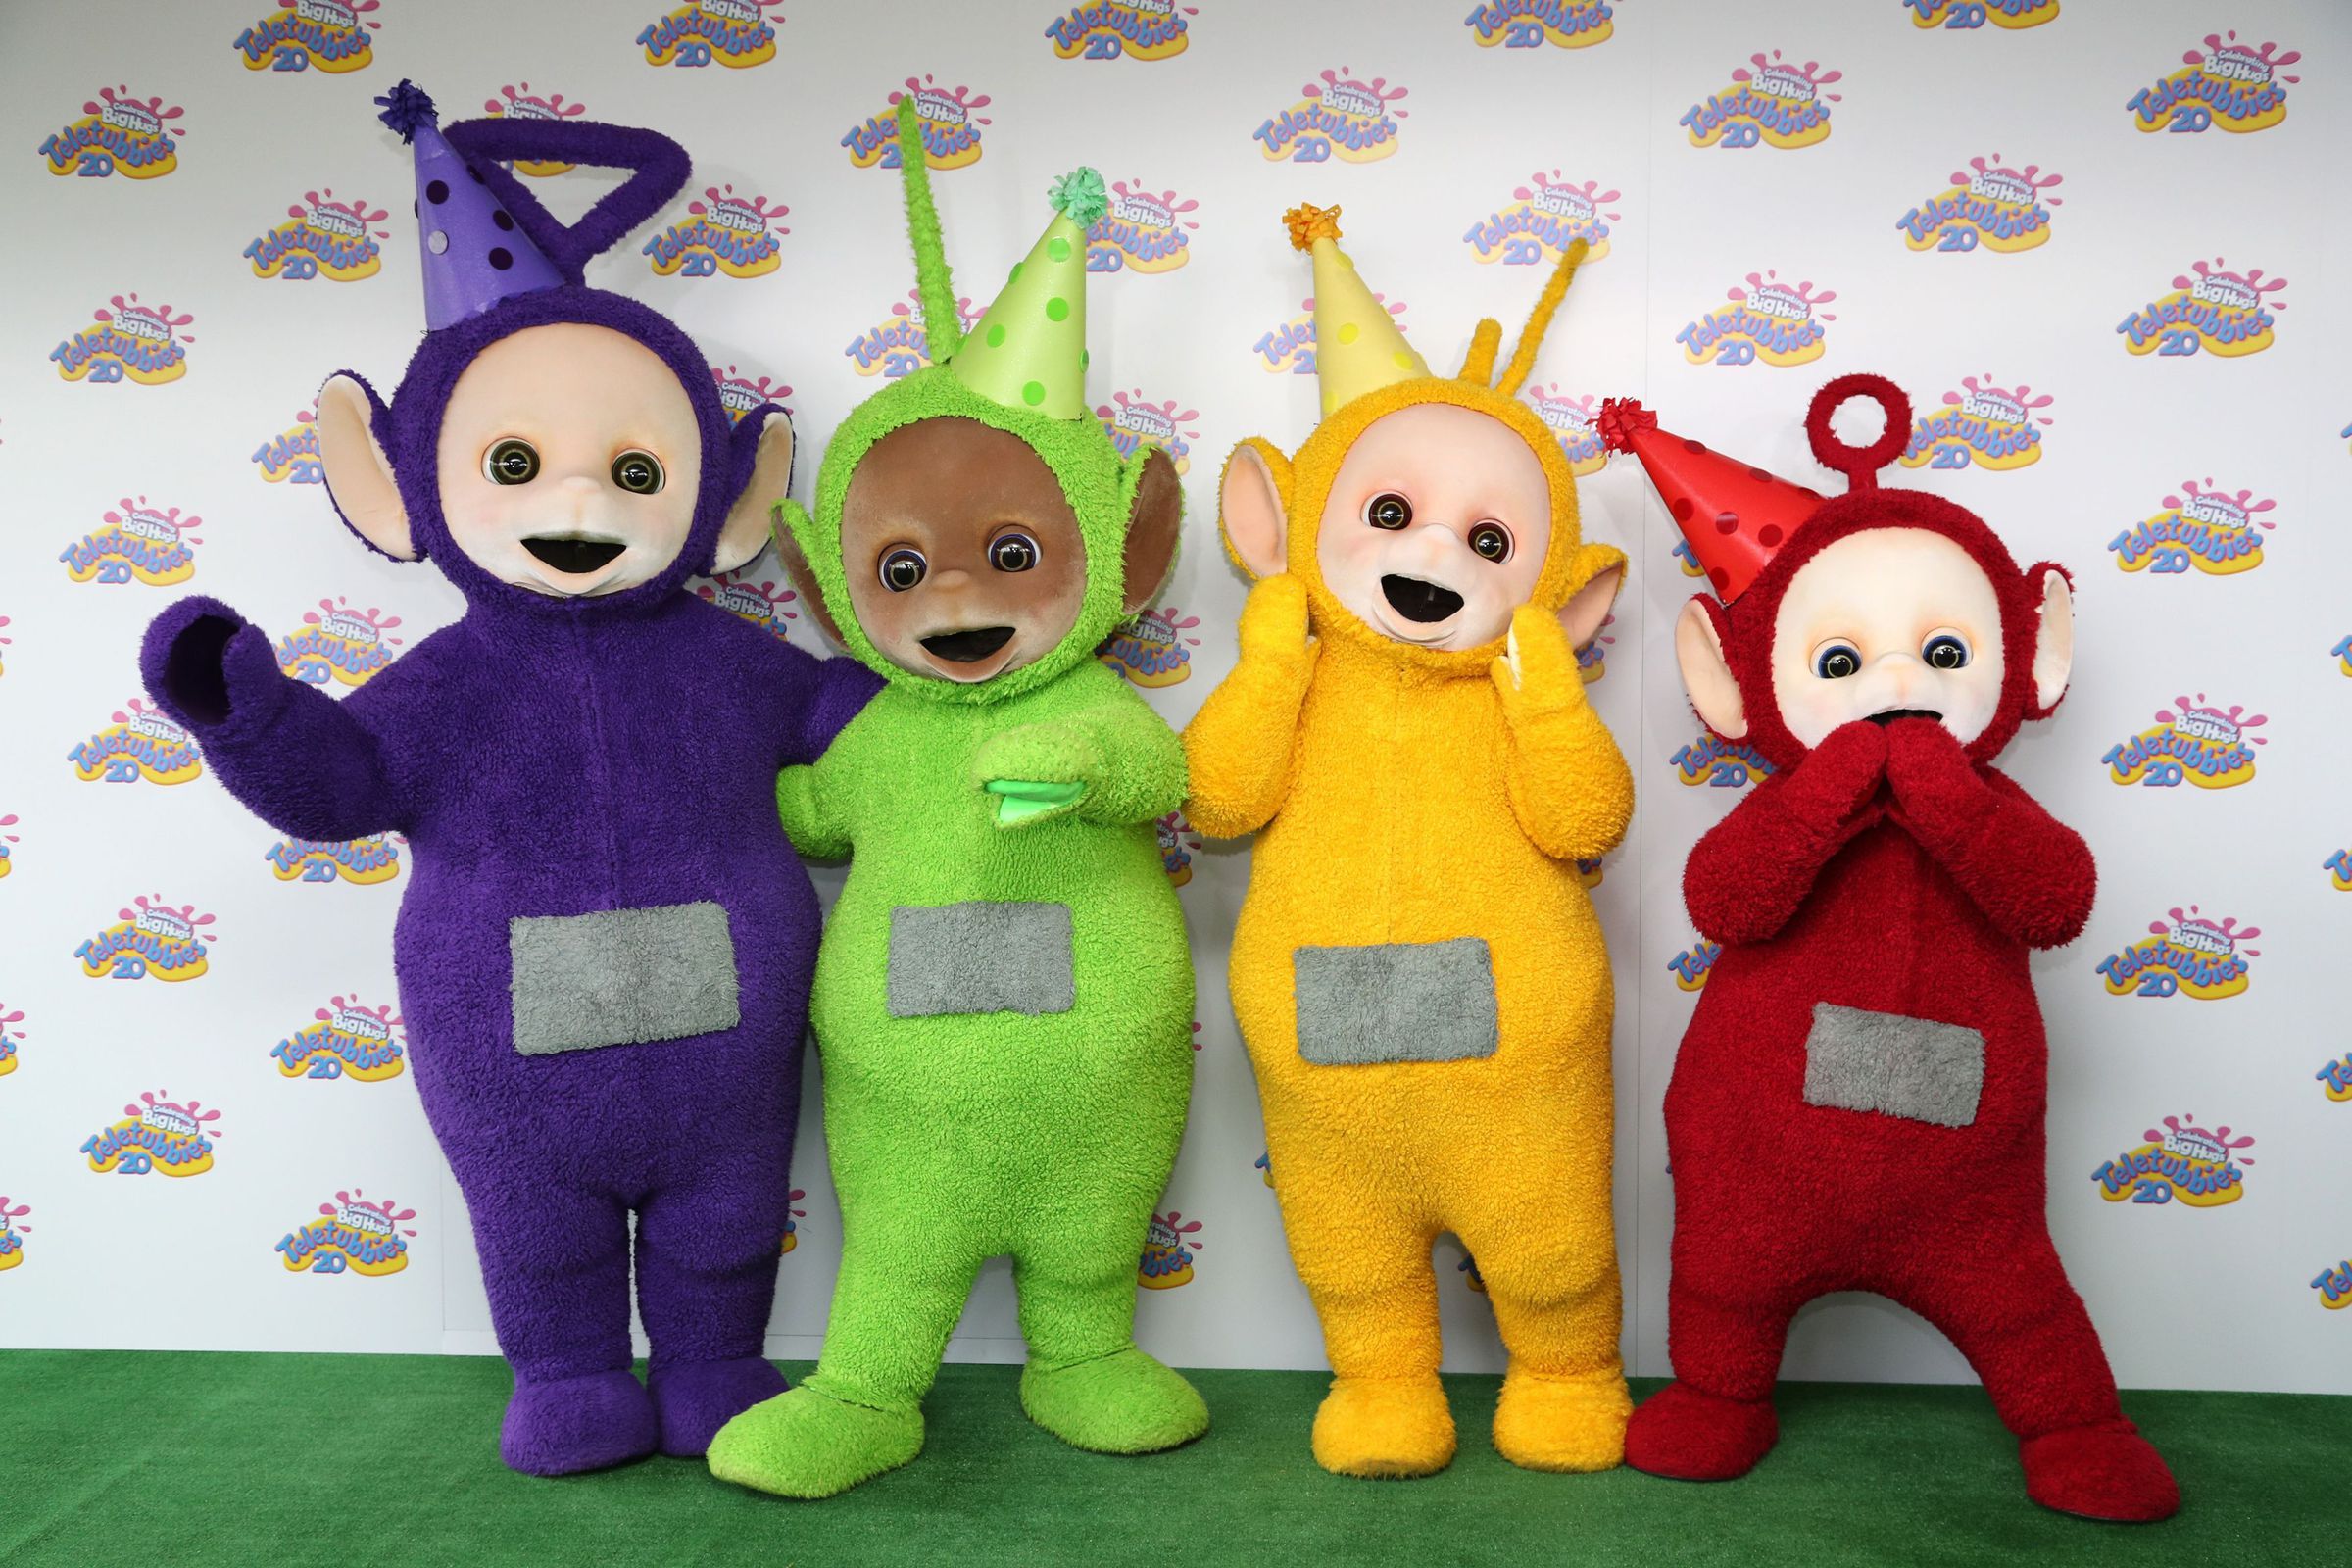 Teletubbies 20th anniversary party - London